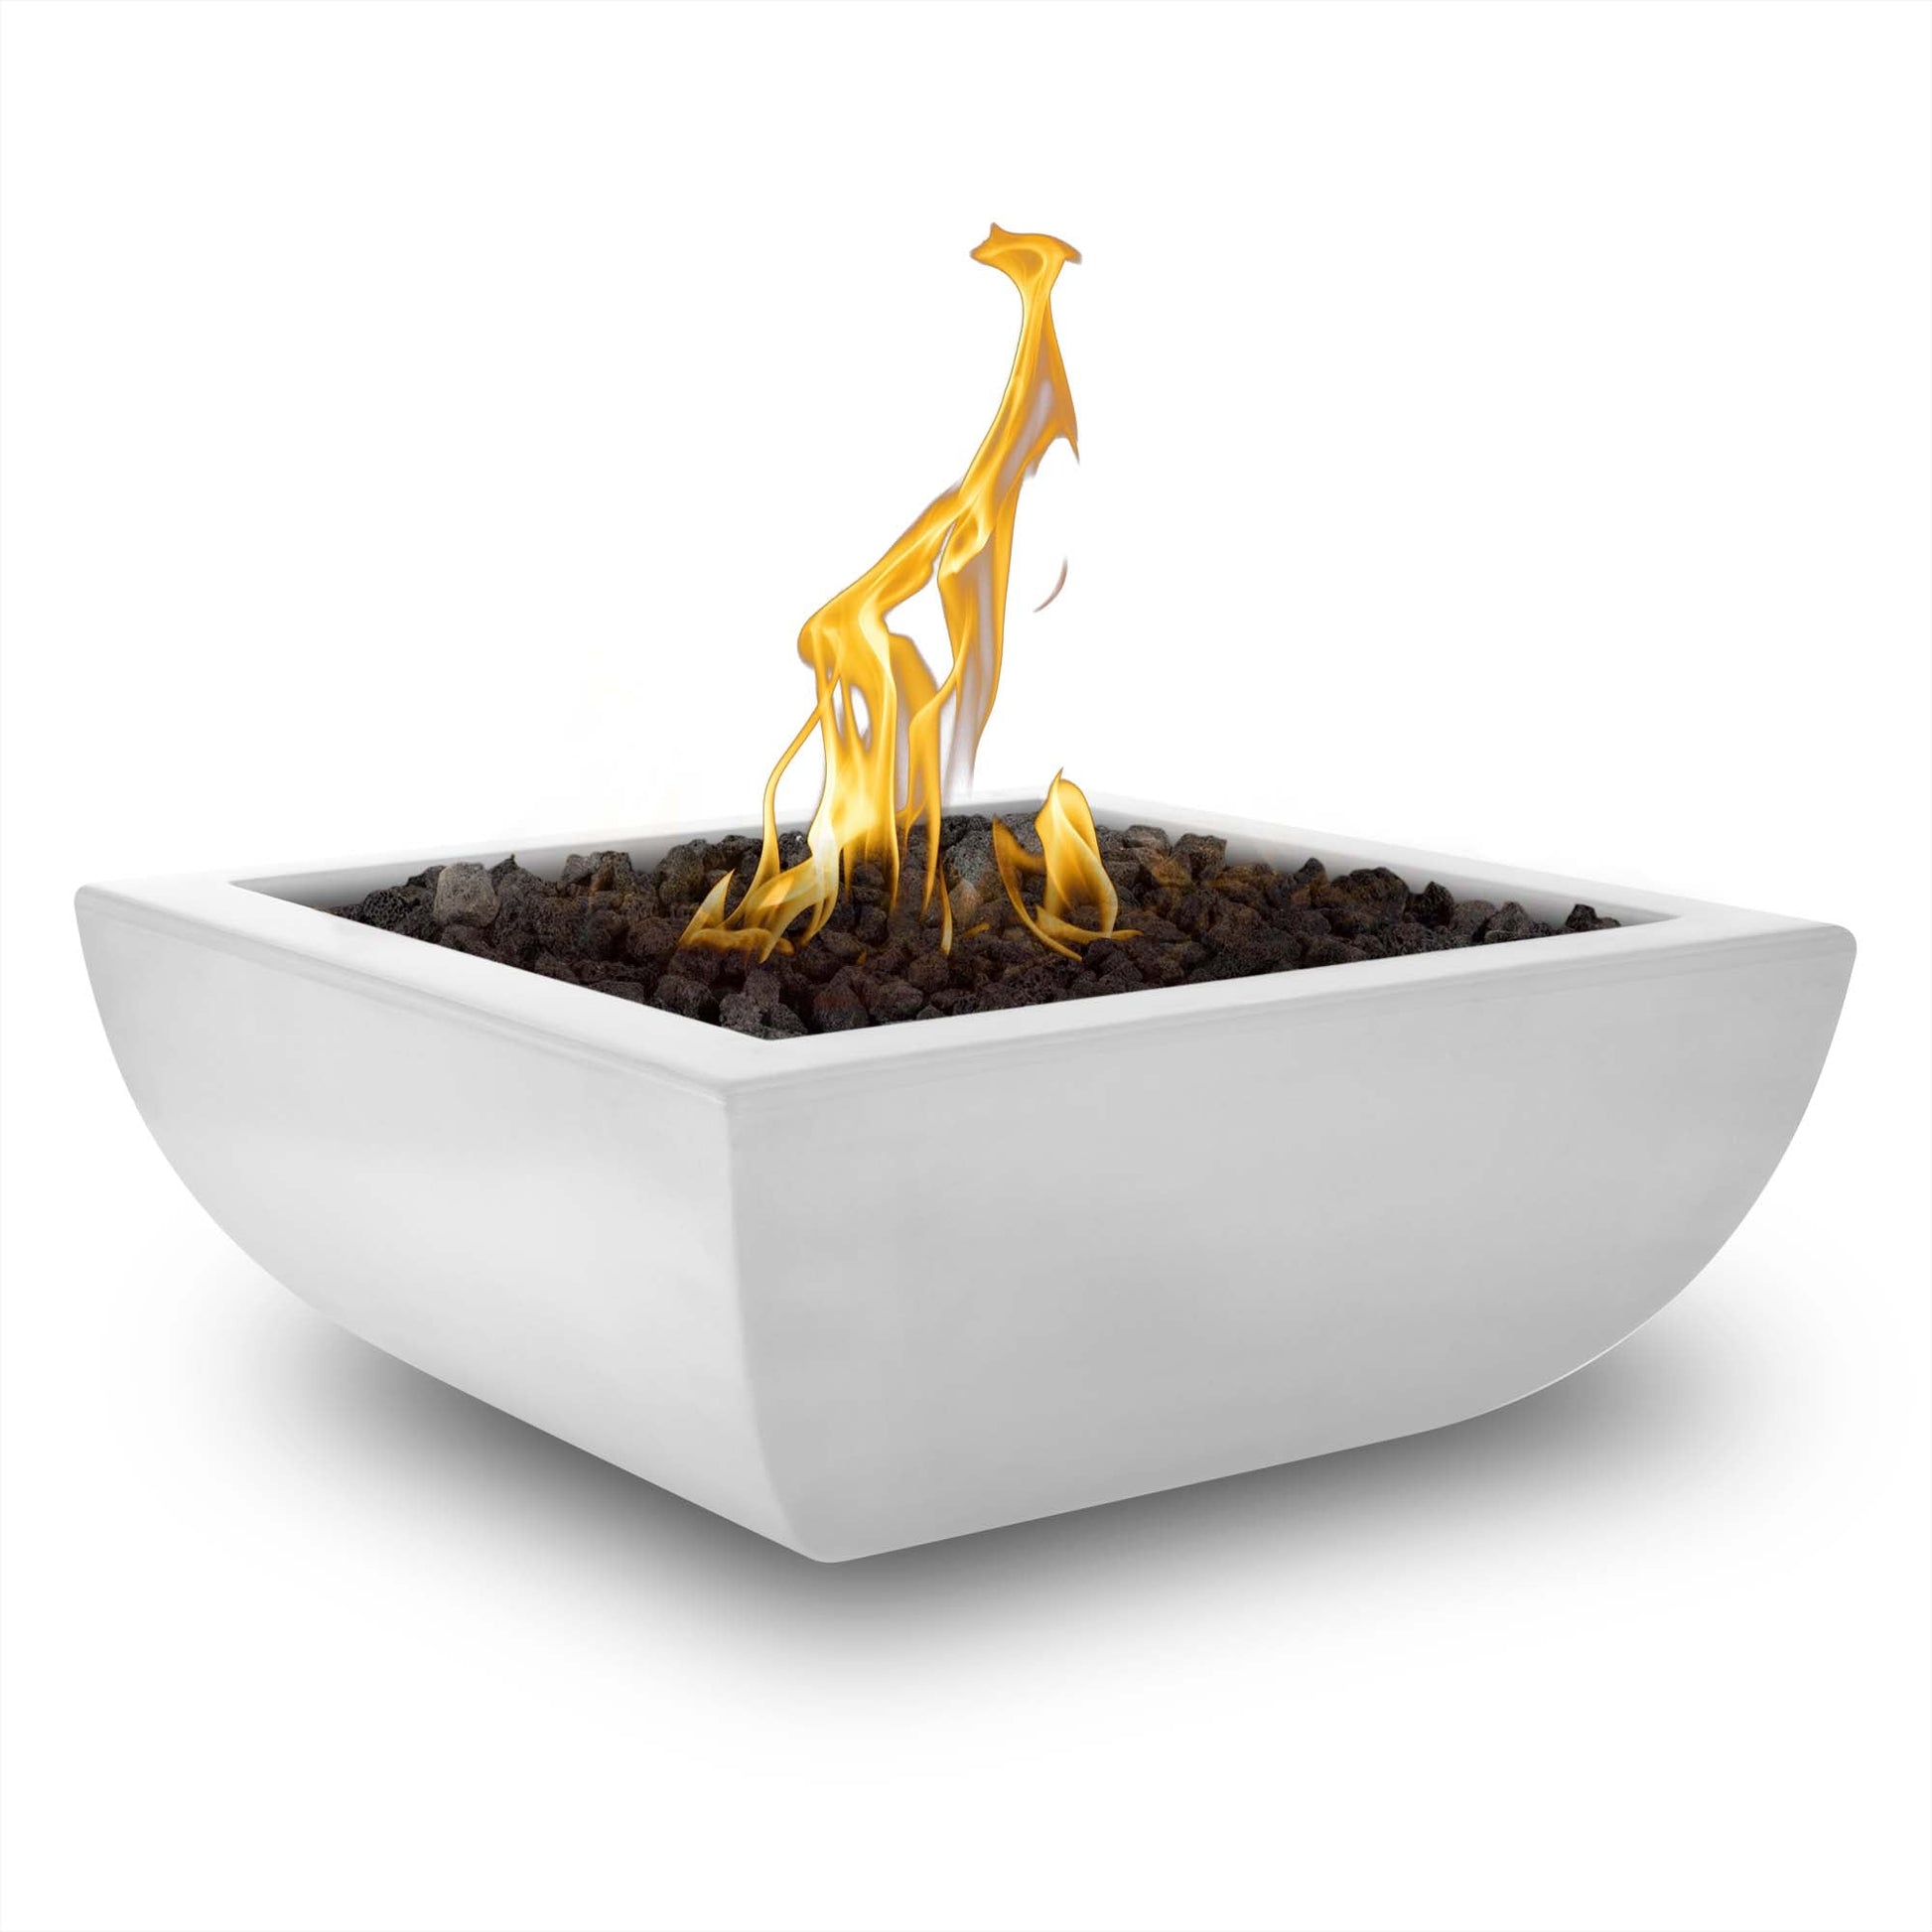 The Outdoor Plus Square Avalon 24" Metallic Copper GFRC Concrete Natural Gas Fire Bowl with Match Lit with Flame Sense Ignition